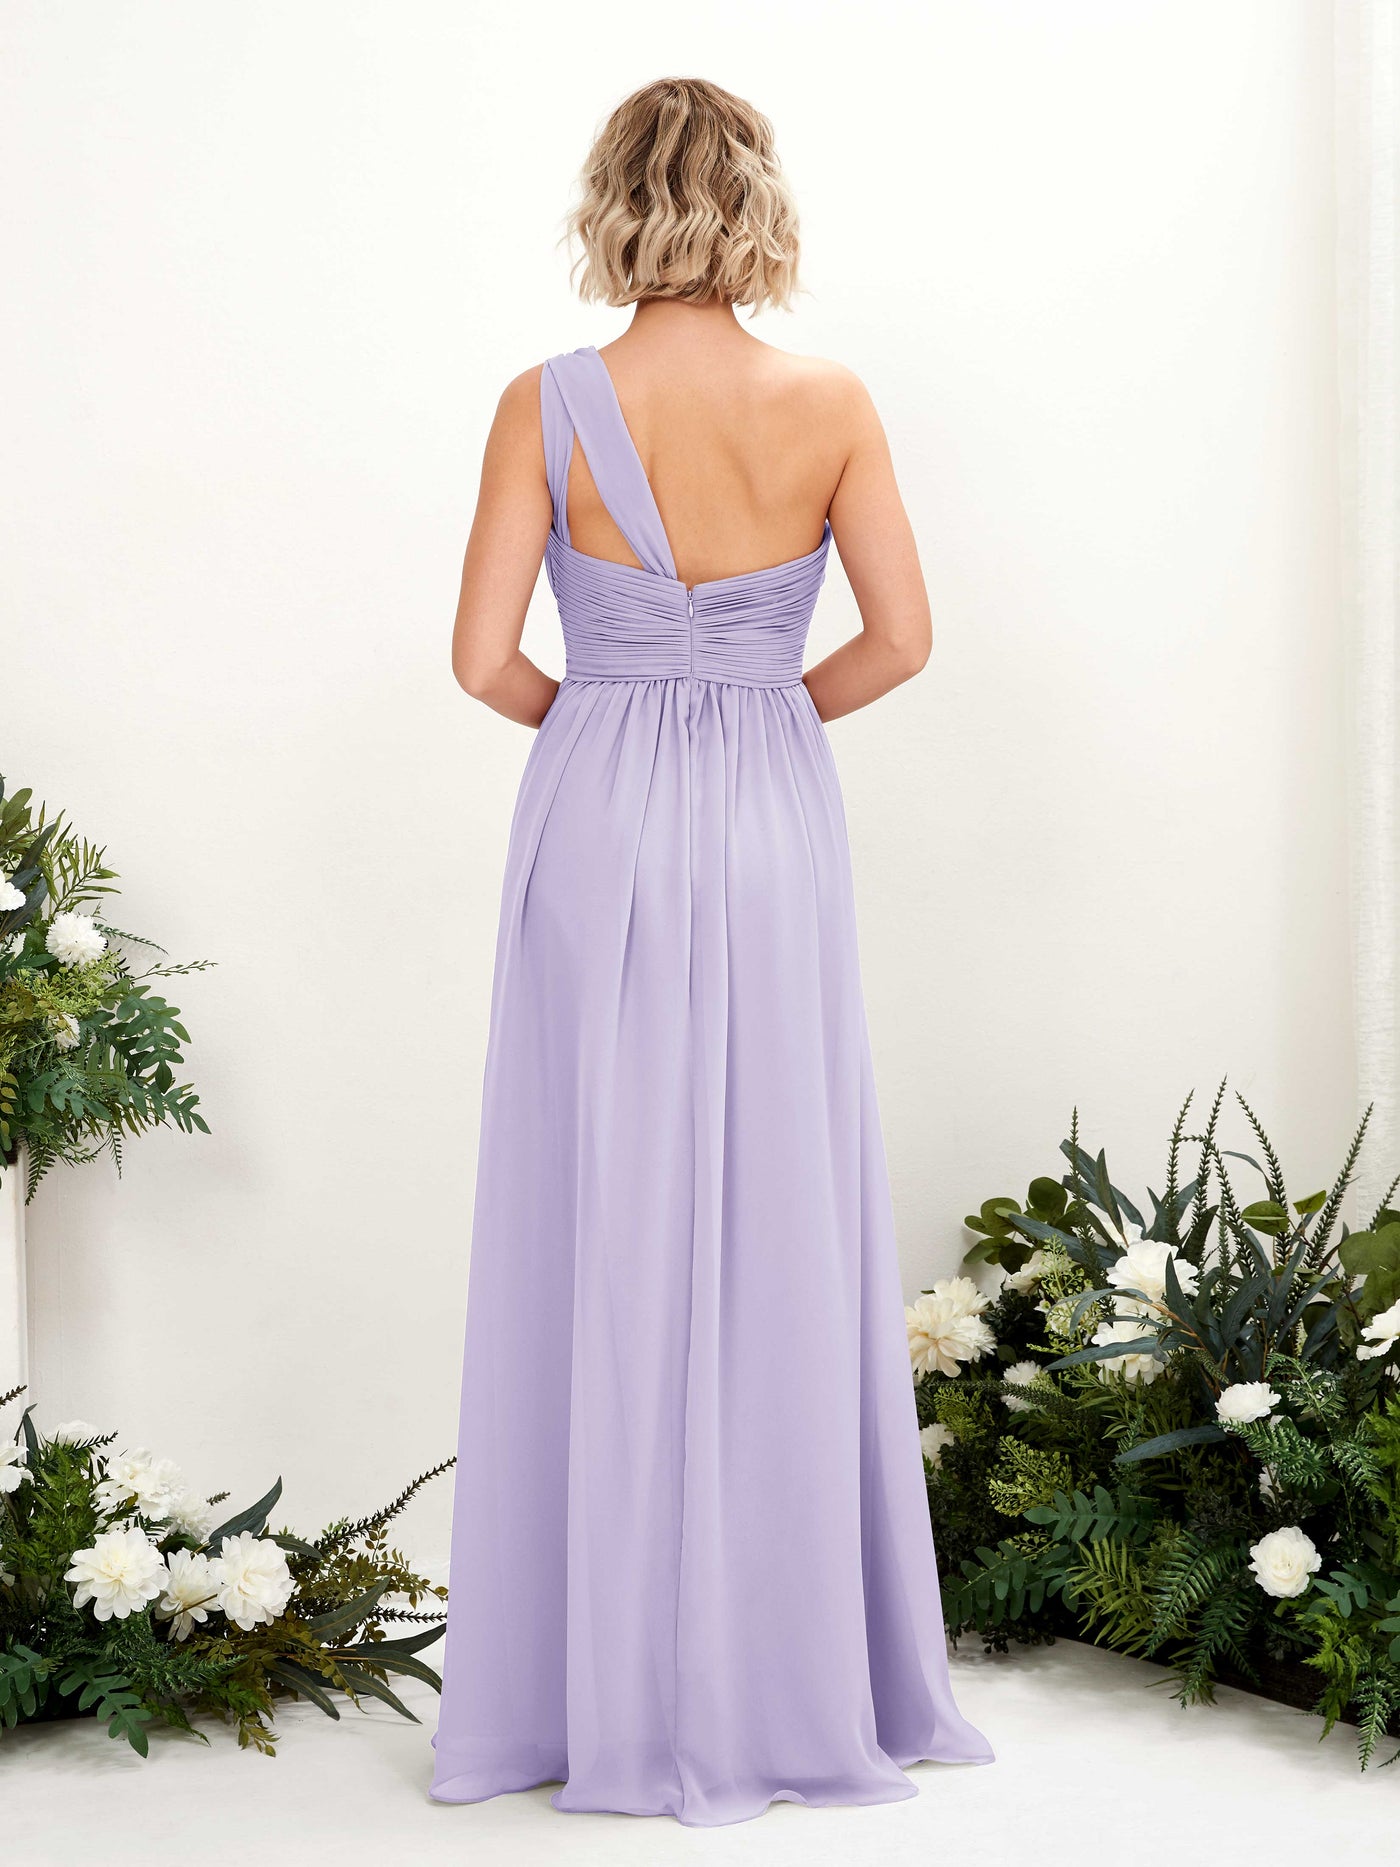 Lilac Bridesmaid Dresses Bridesmaid Dress Ball Gown Chiffon One Shoulder Full Length Sleeveless Wedding Party Dress (81225014)#color_lilac